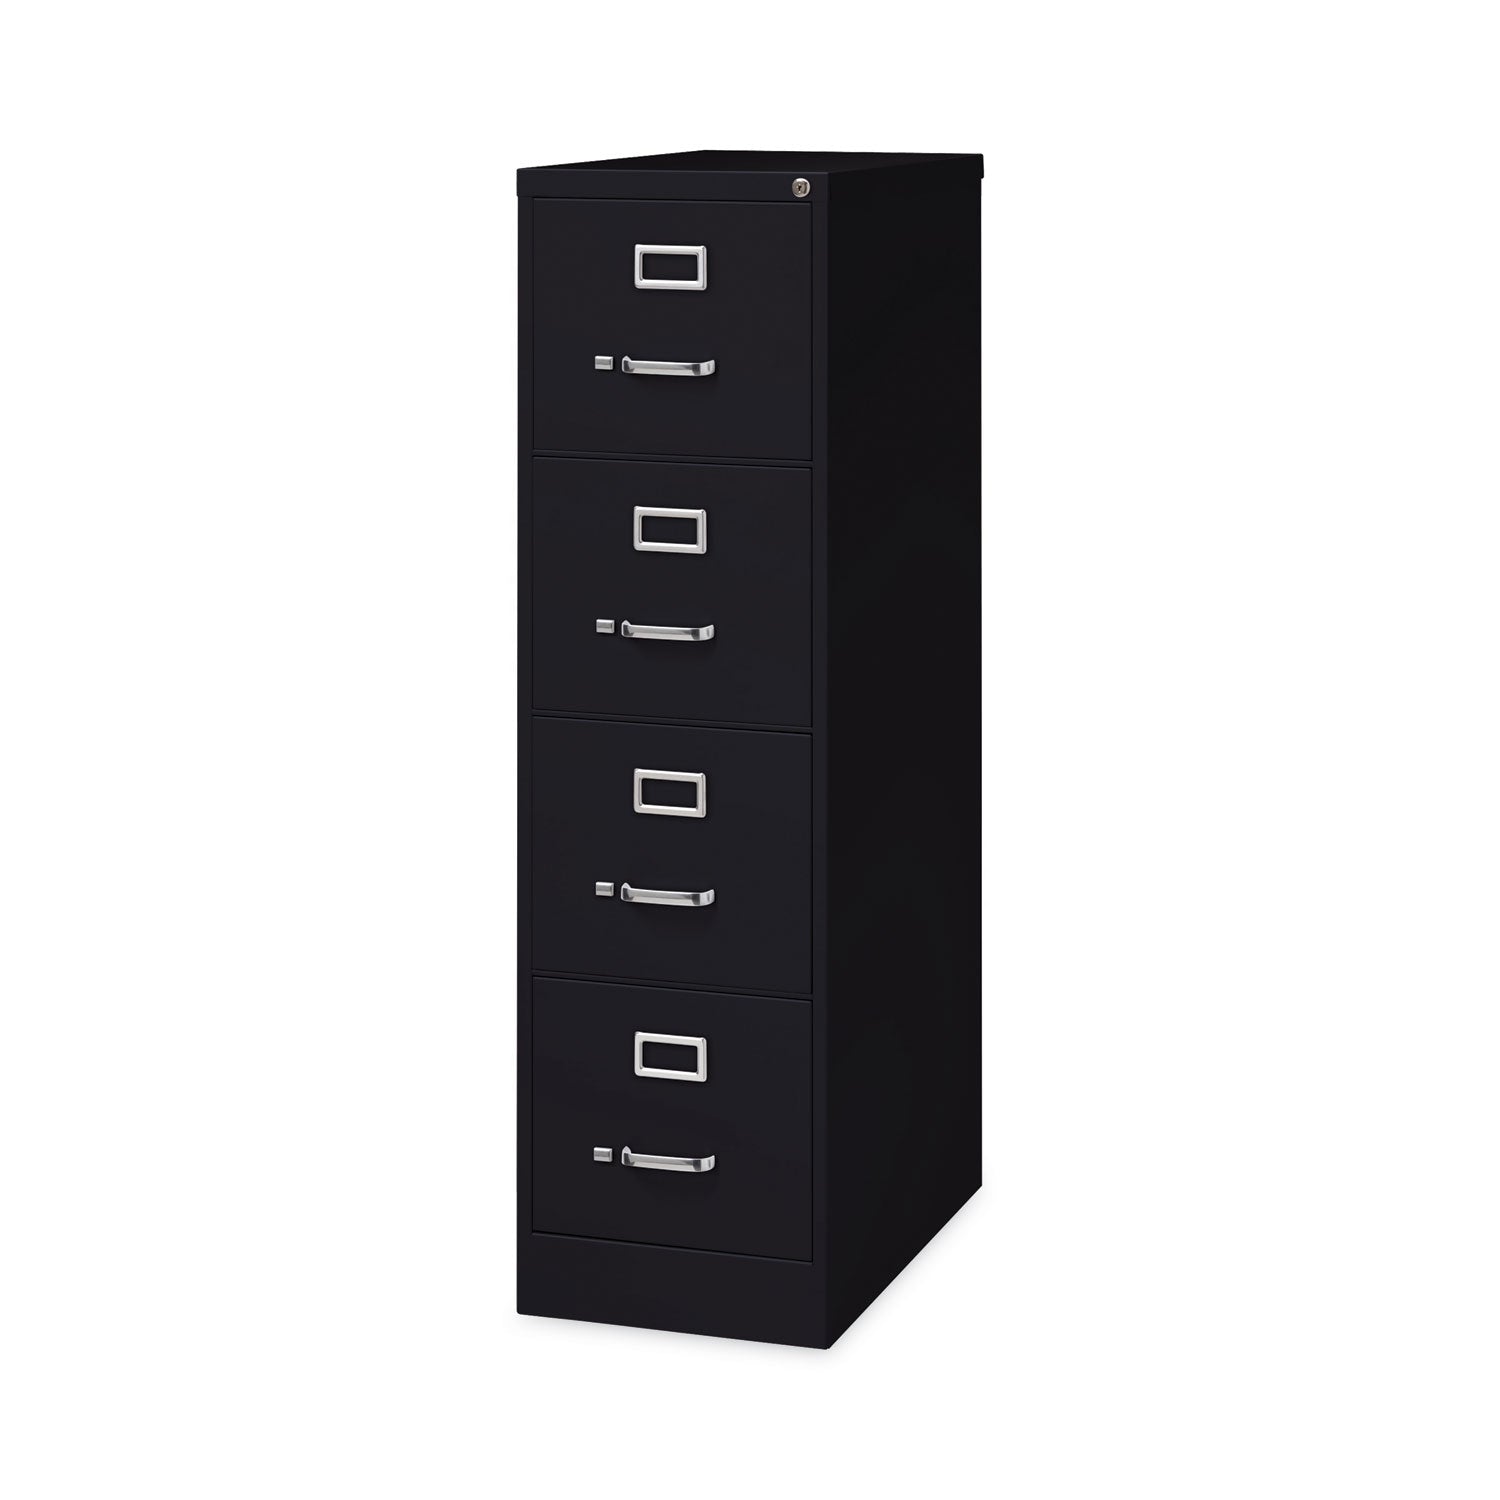 vertical-letter-file-cabinet-4-letter-size-file-drawers-black-15-x-265-x-52_hid14105 - 2